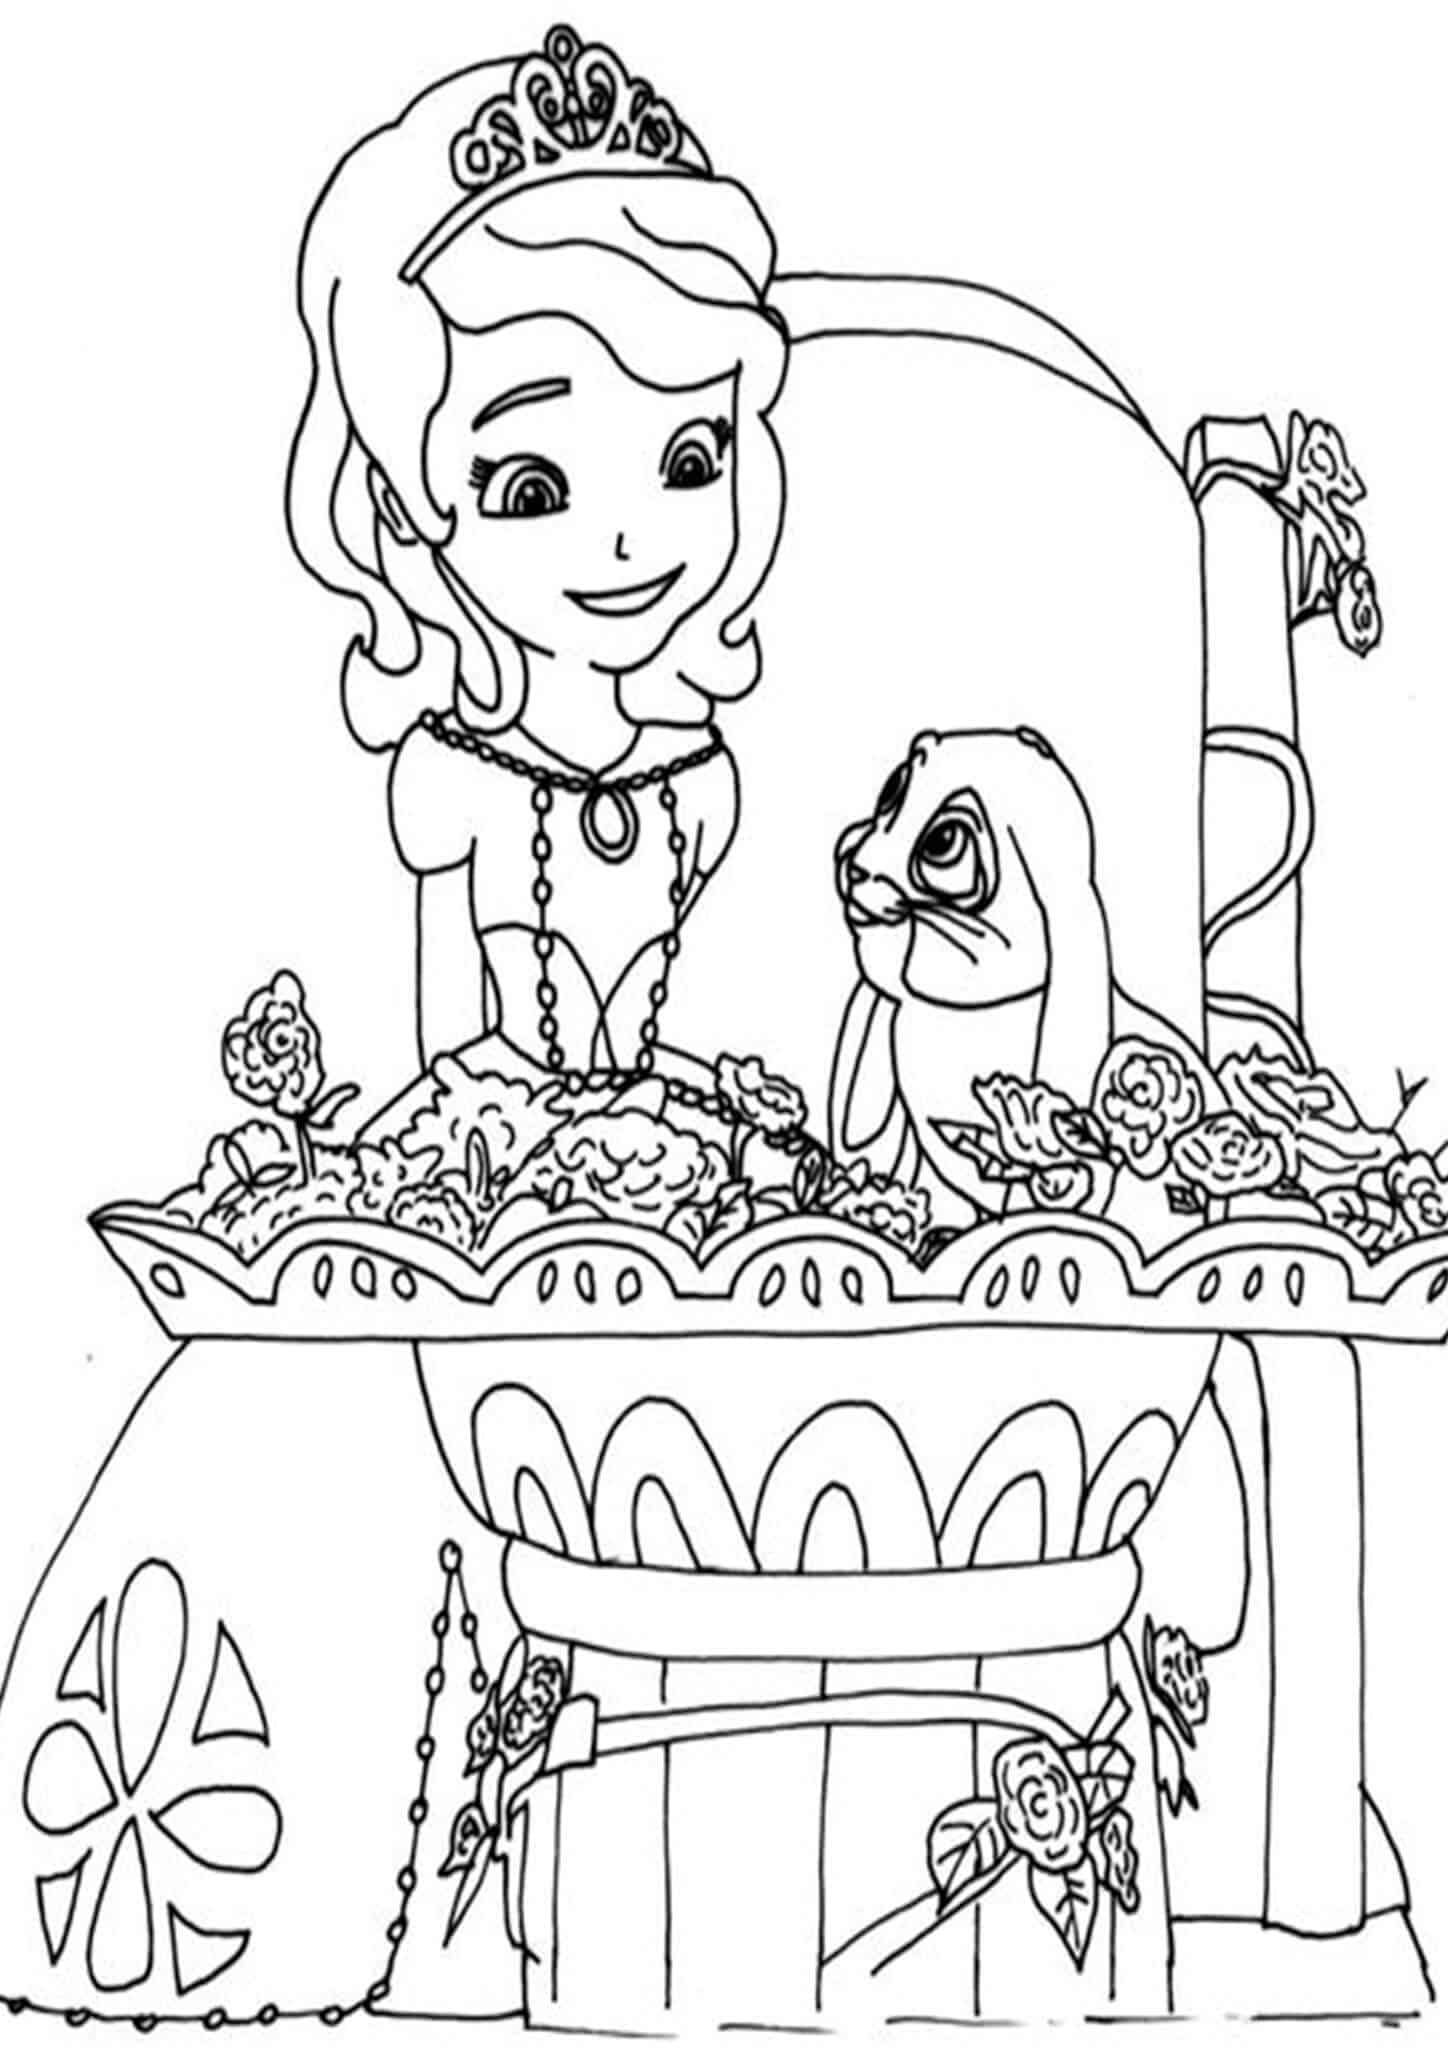 Free easy to print sofia the first coloring pages princess coloring pages disney princess coloring pages disney coloring pages